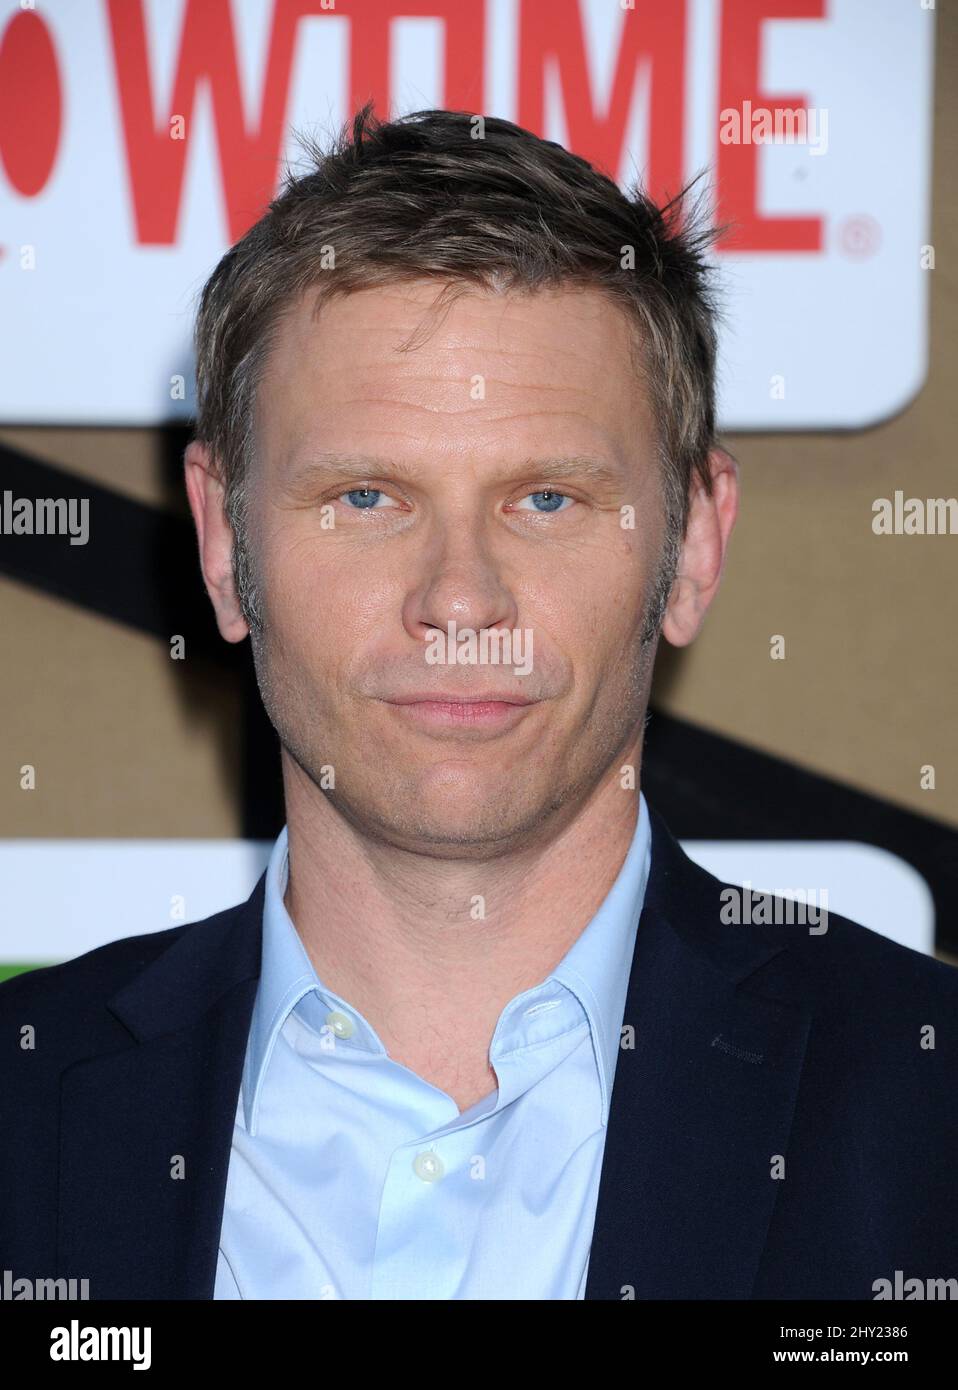 Mark Pellegrino attending the CBS, Showtime and CW 2013 Annual Summer Stars Party in Beverly Hills, California. Stock Photo